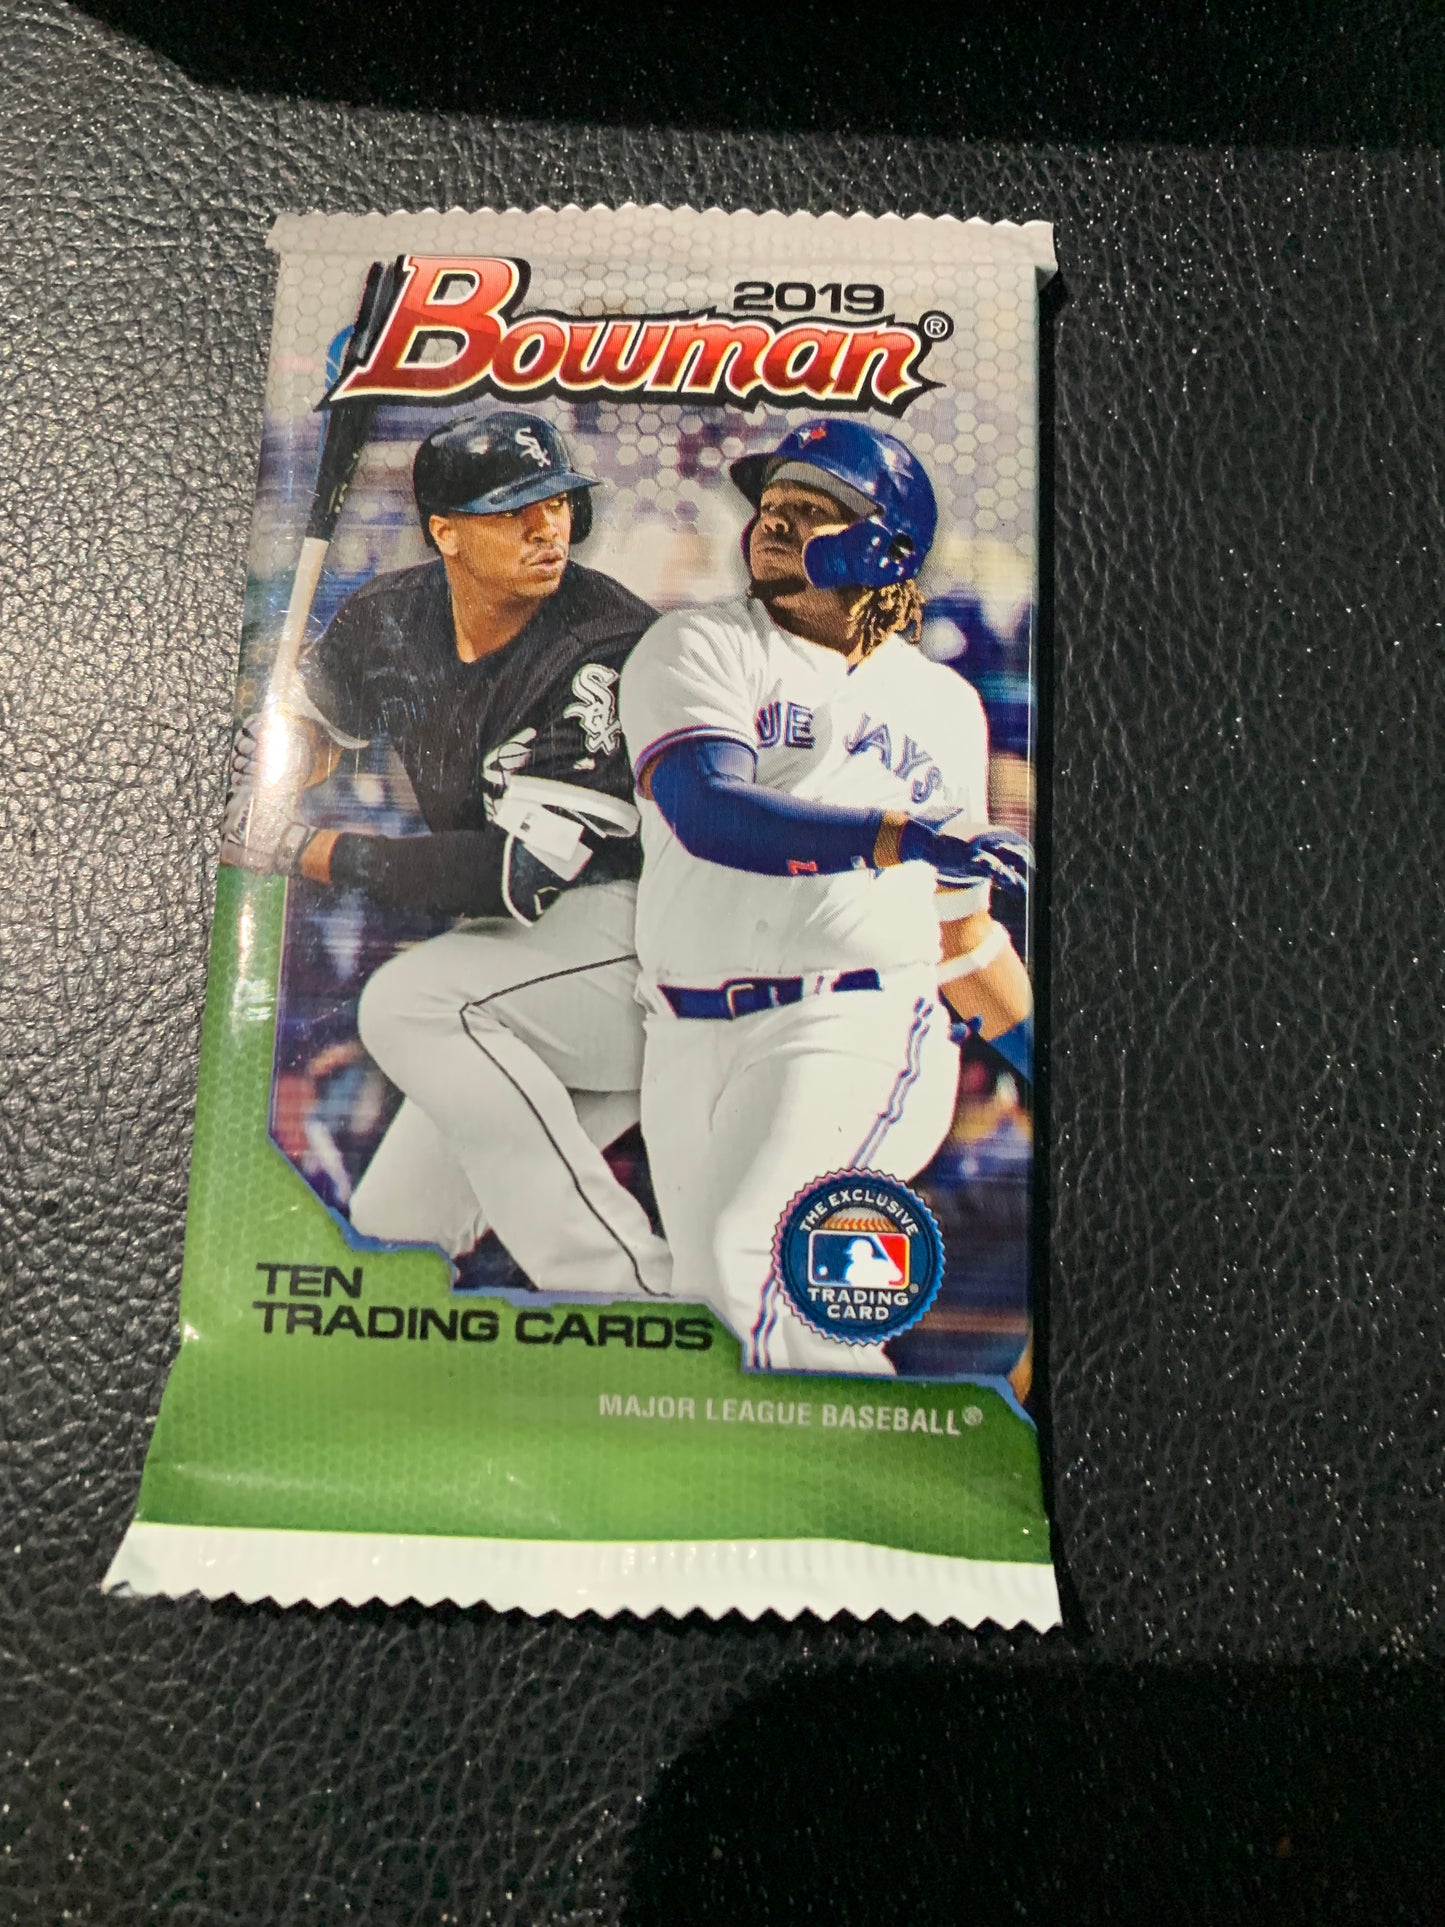 2019 Bowman Retail pack for sale